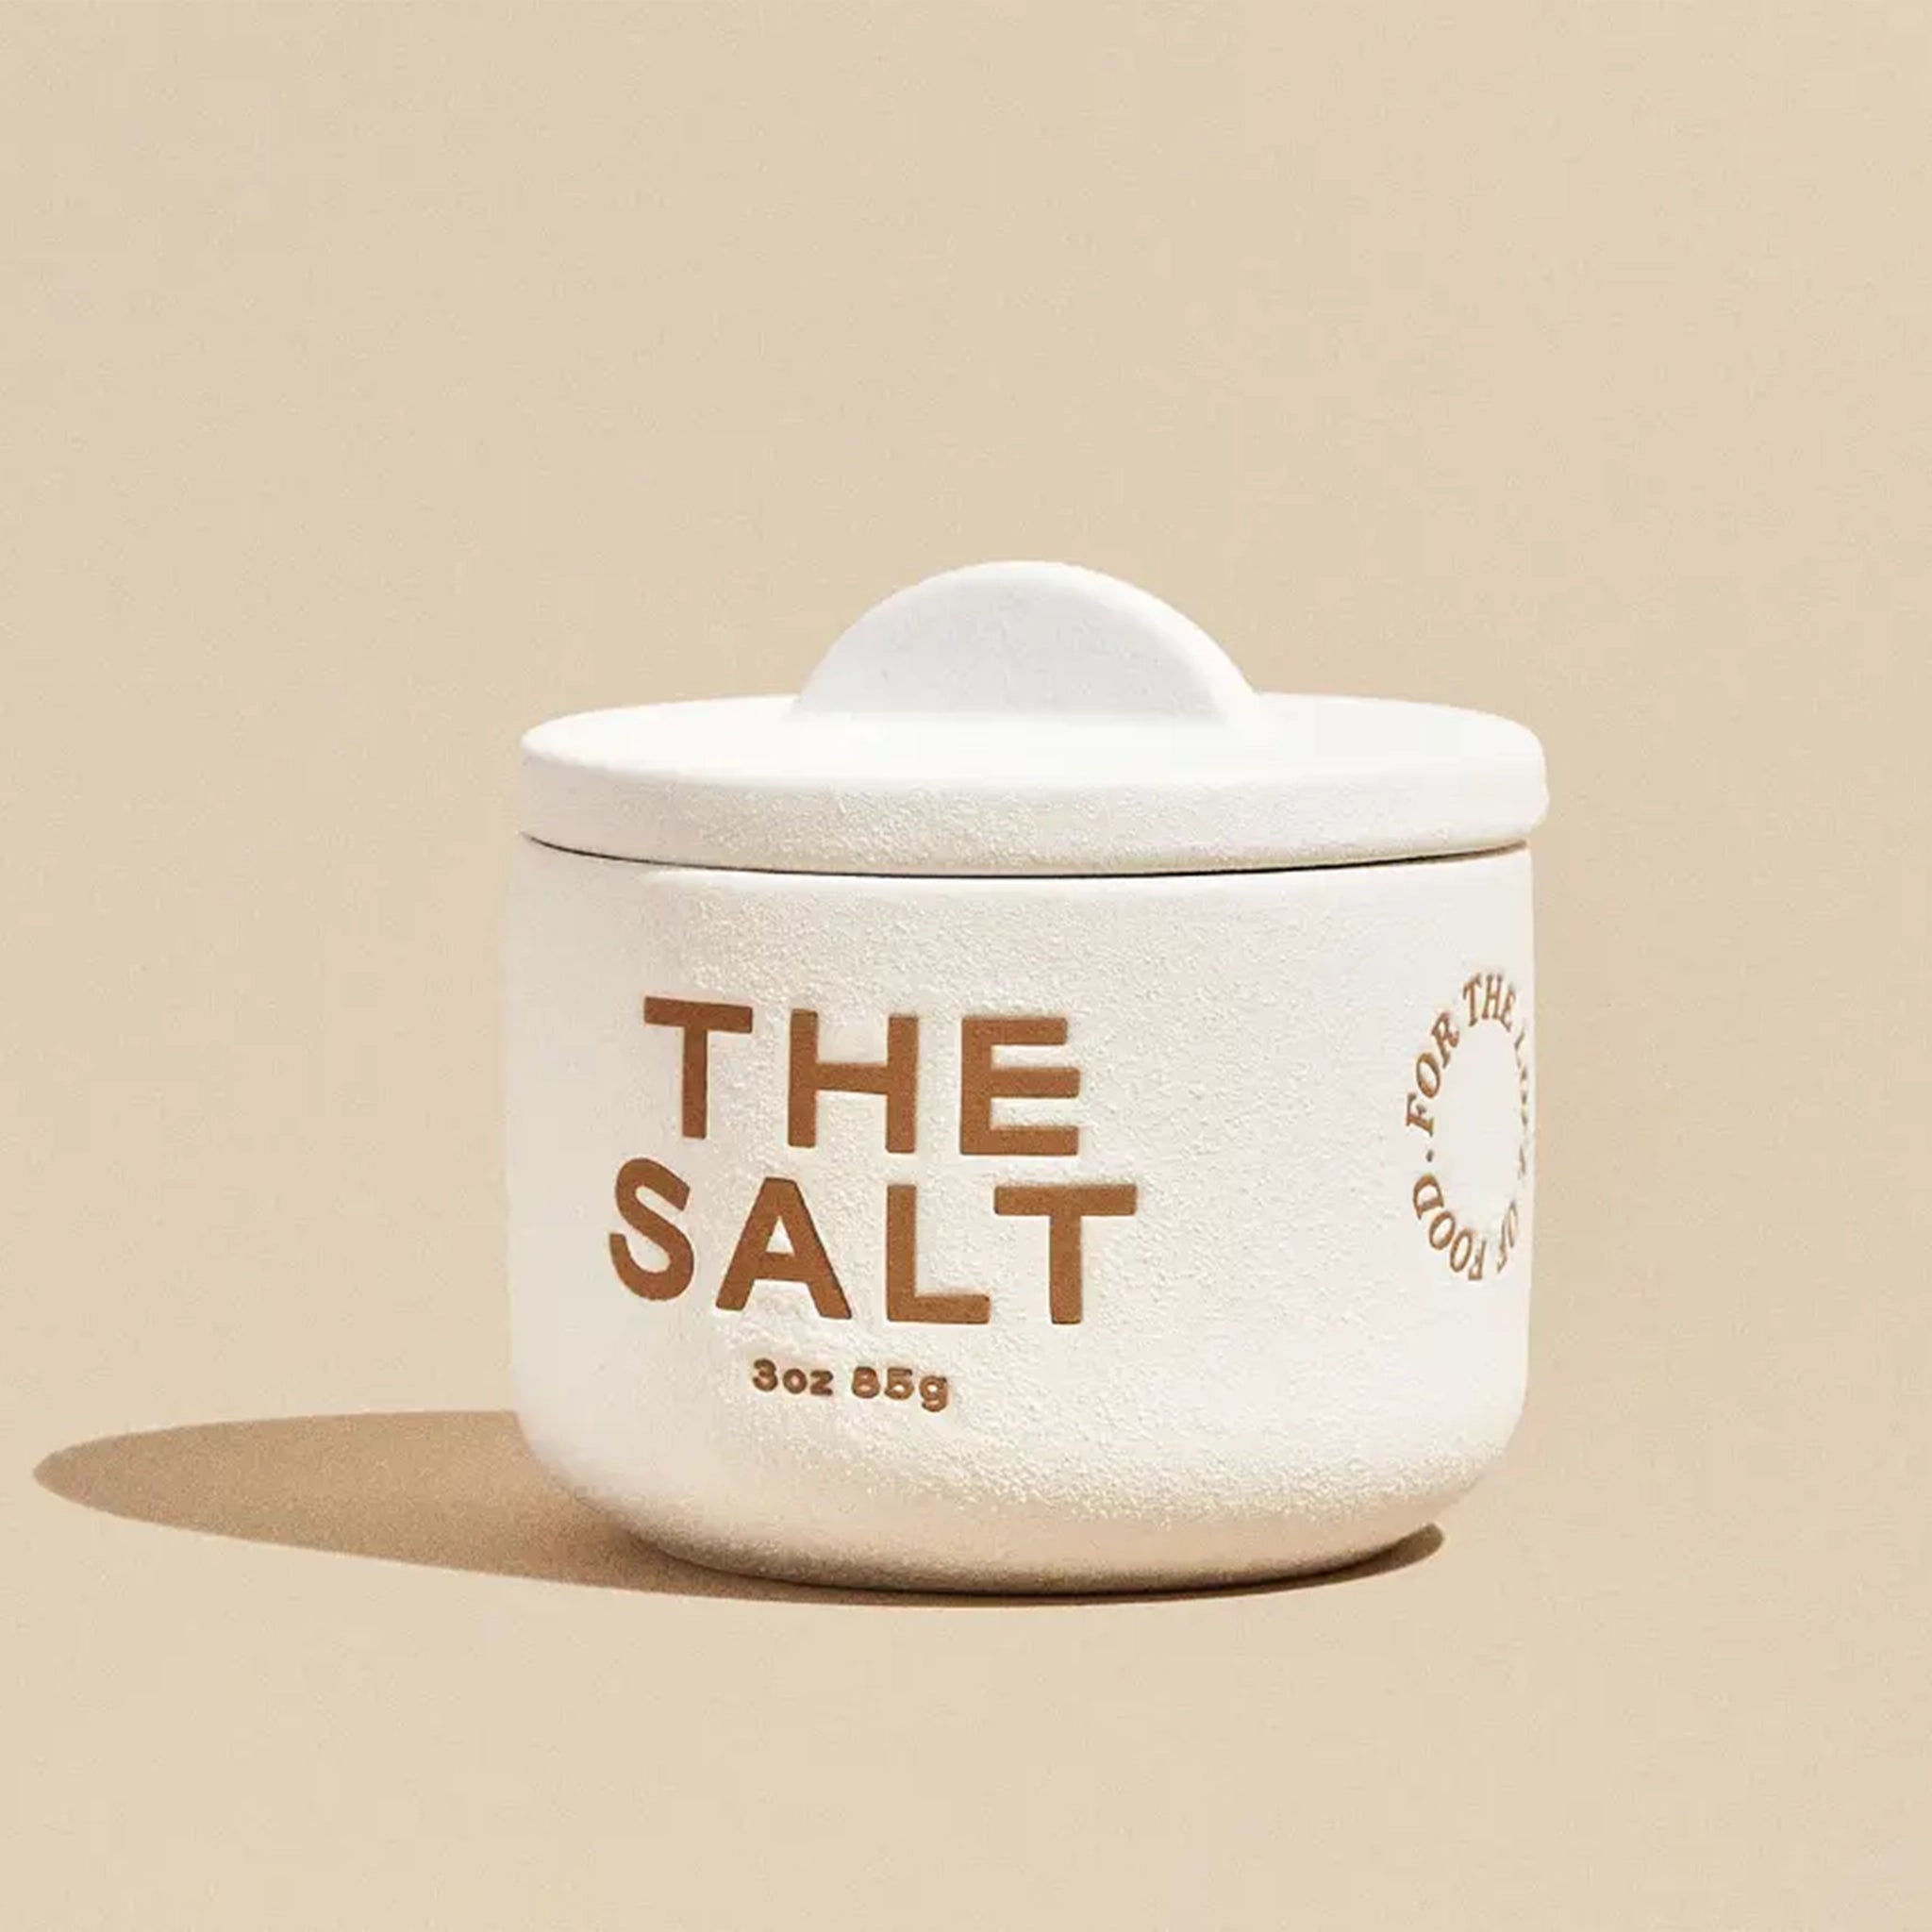 A 3oz bespoke pinch pot with a half moon lid that marries form and function along with brown text on the front that reads, &quot;The Salt 3oz 85g&quot;.